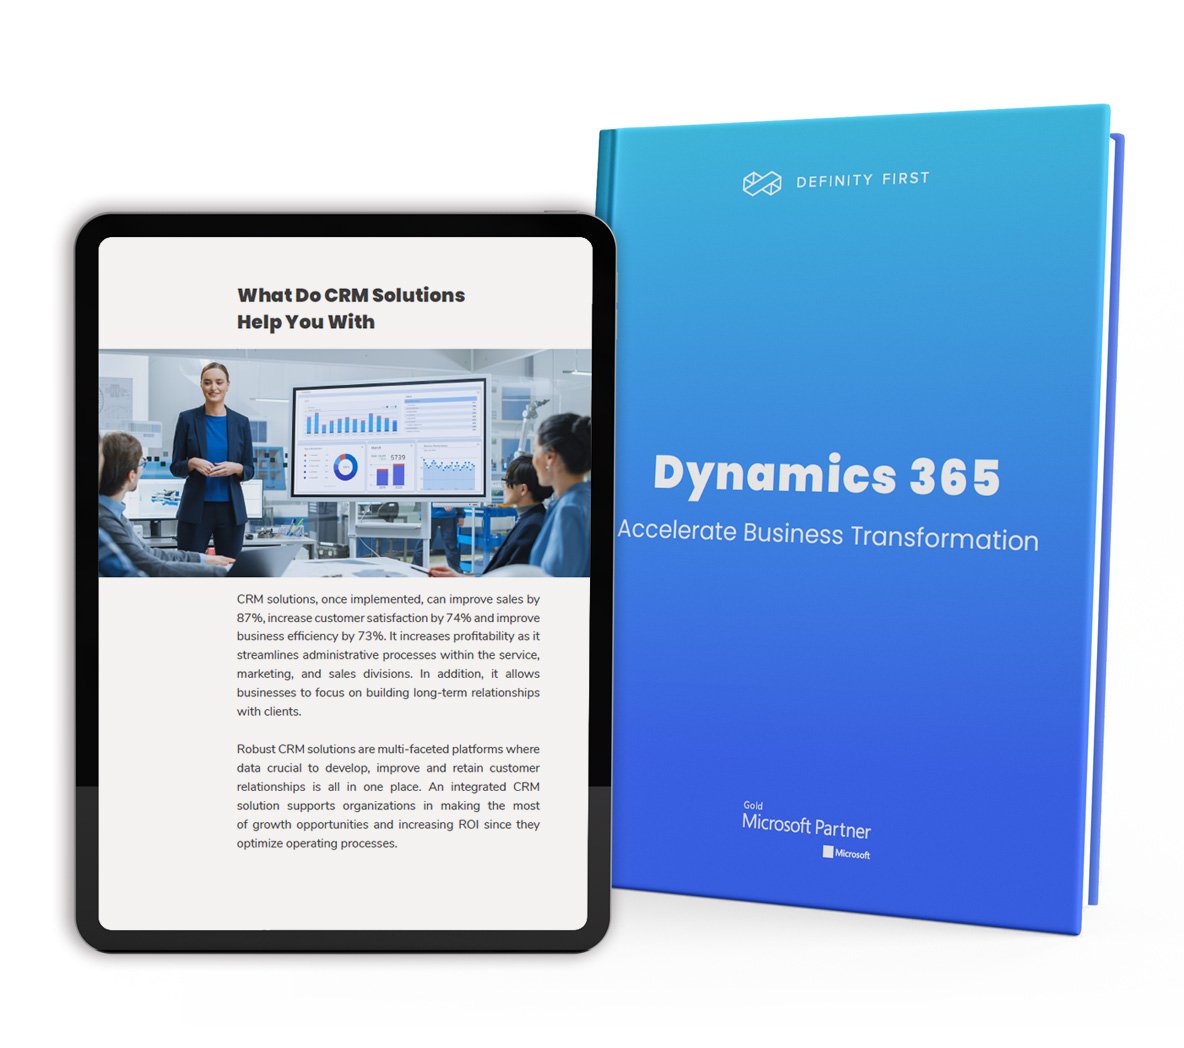 How to accelerate business transformation with Dynamics 365